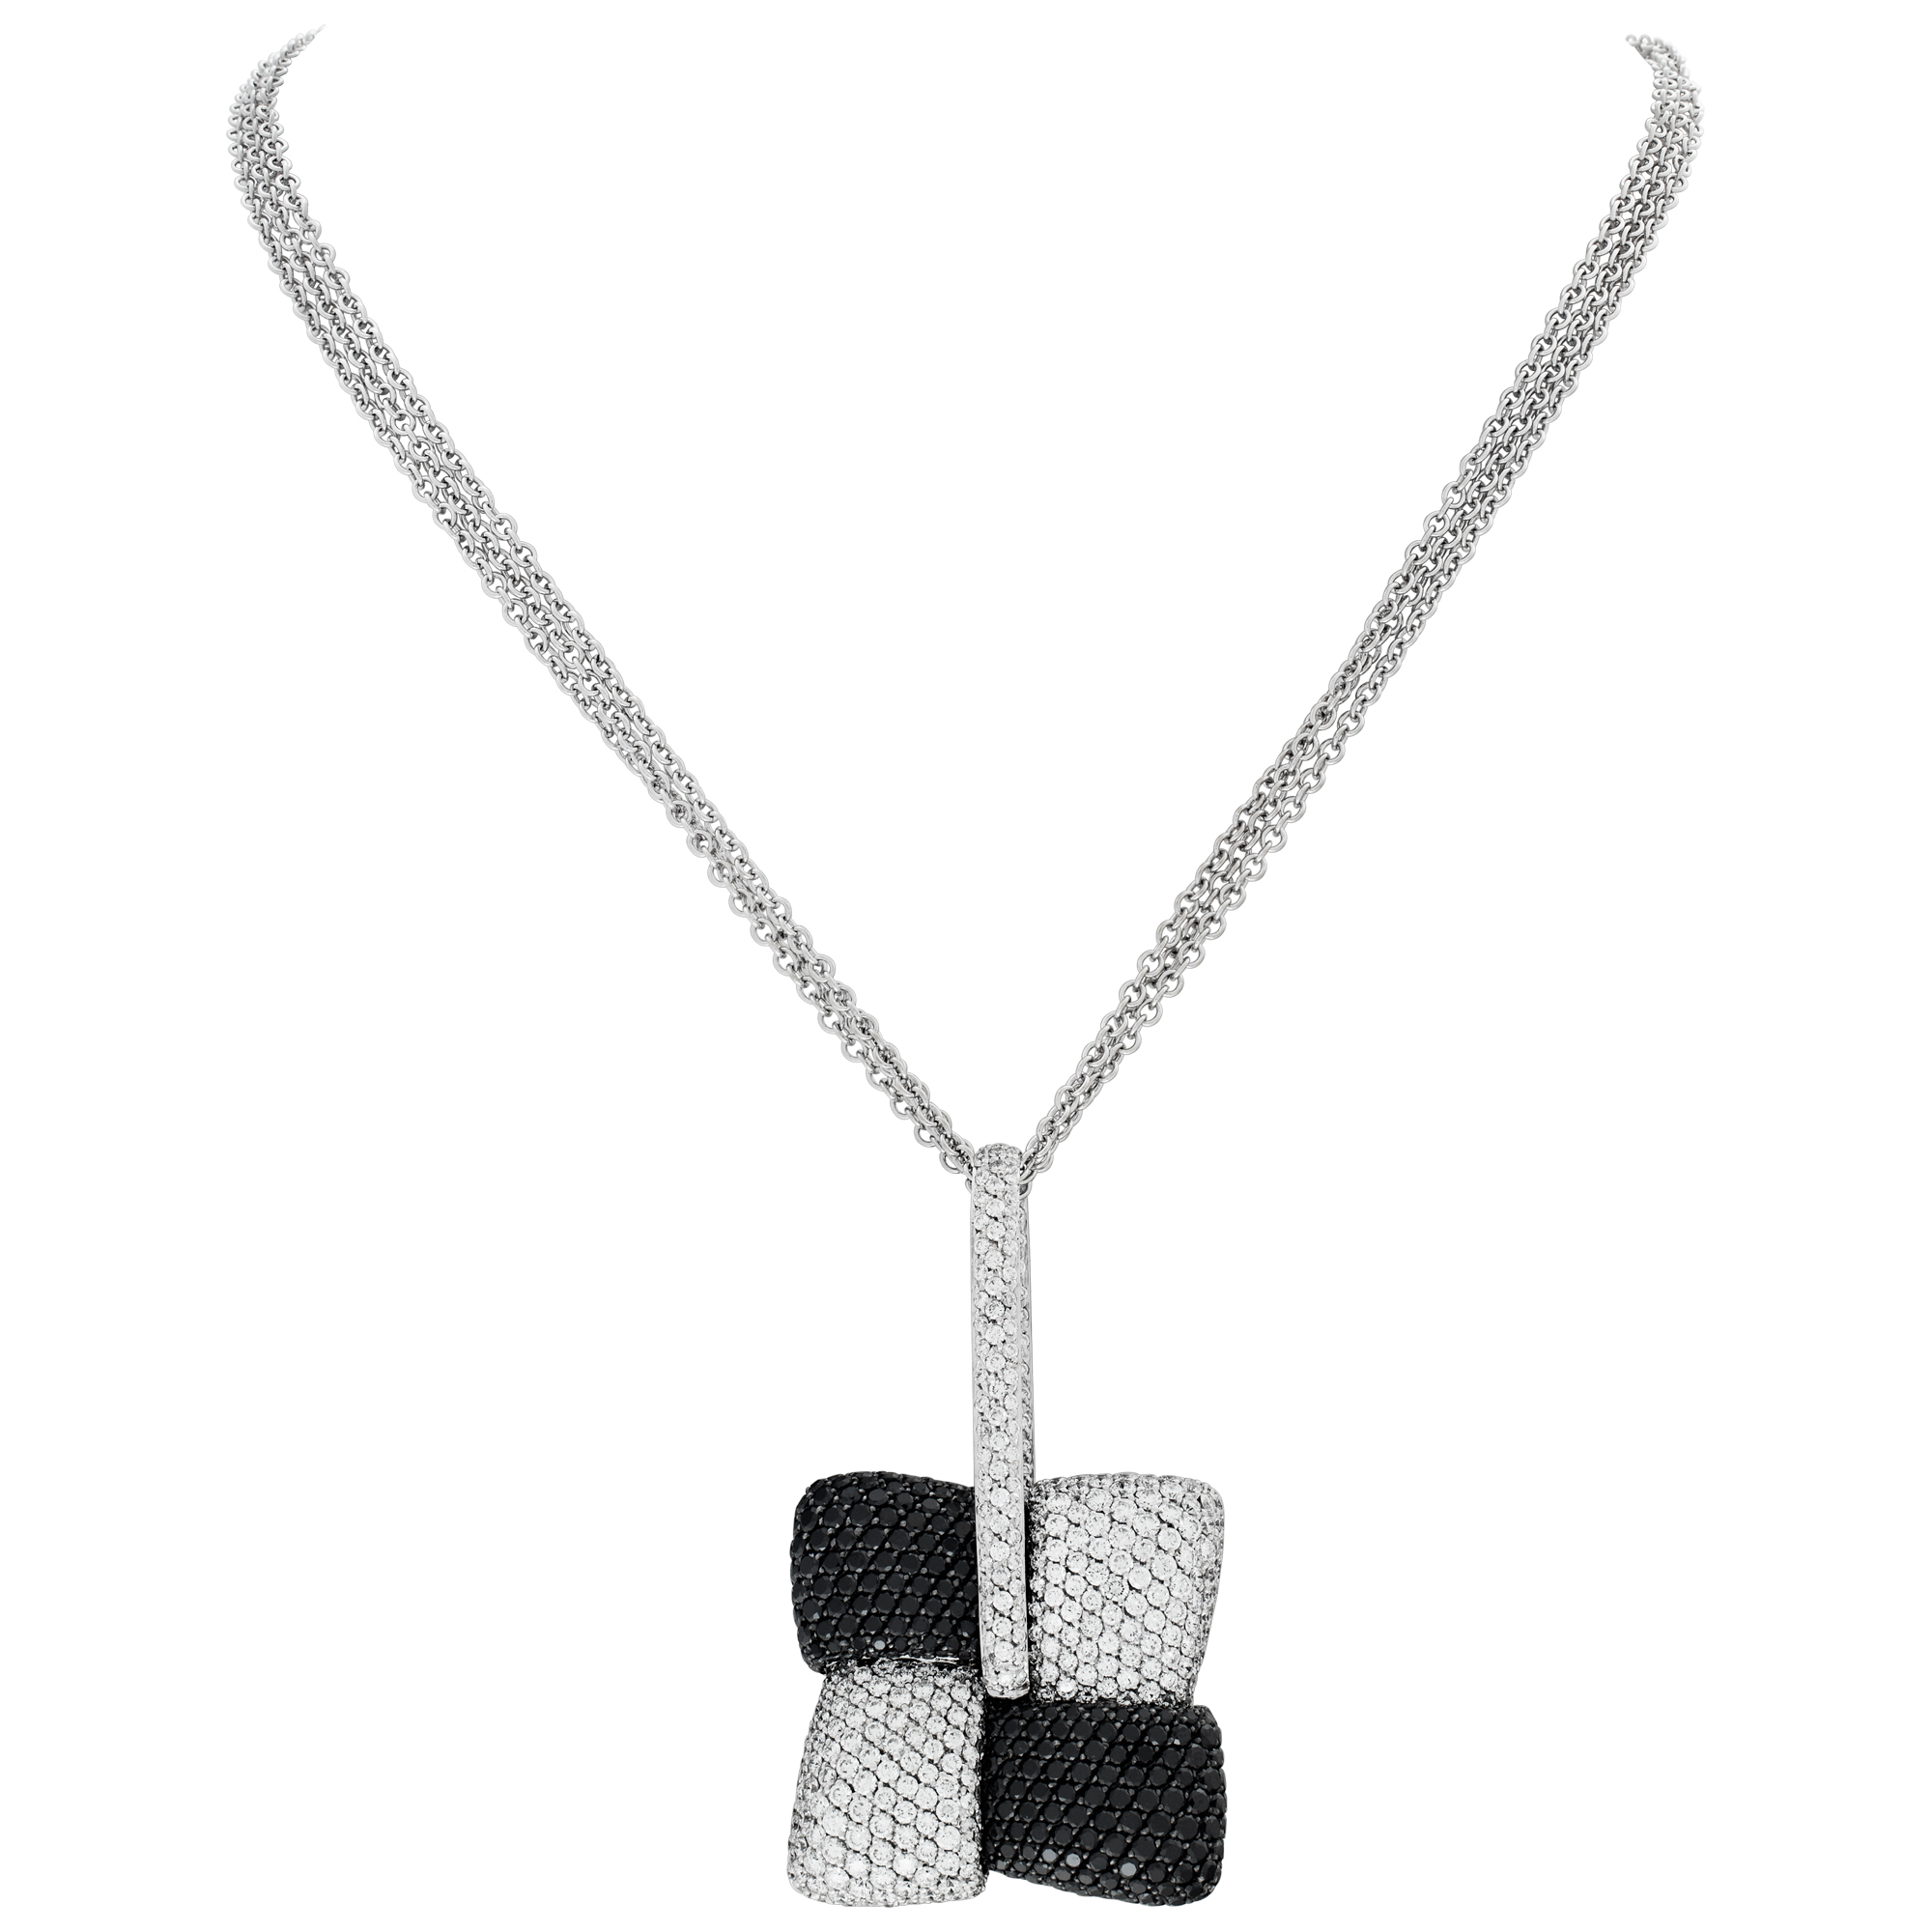 Elegant pave dia pendant + necklace in 18k gold with appx 5 cts white dias and 4.7 cts black dias image 1